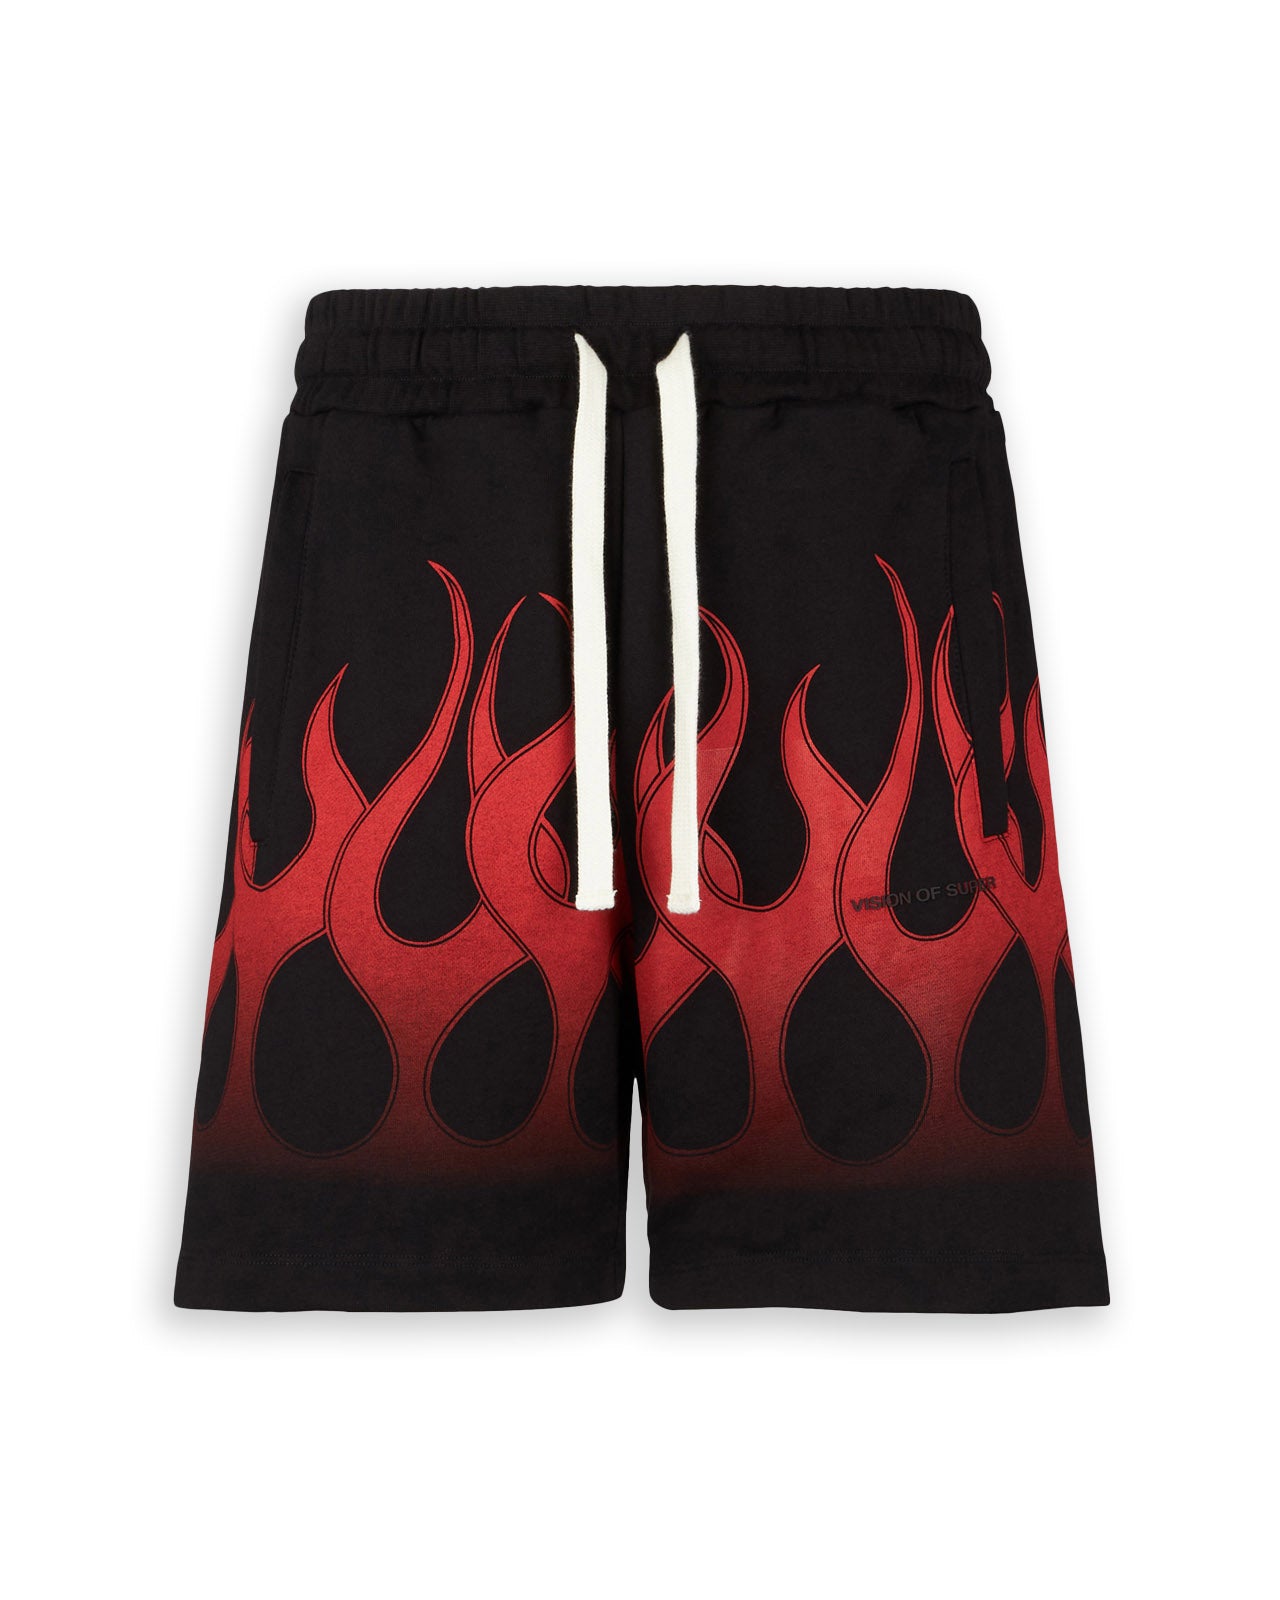 Vision Of Super Fiamme Shorts Red Black Man